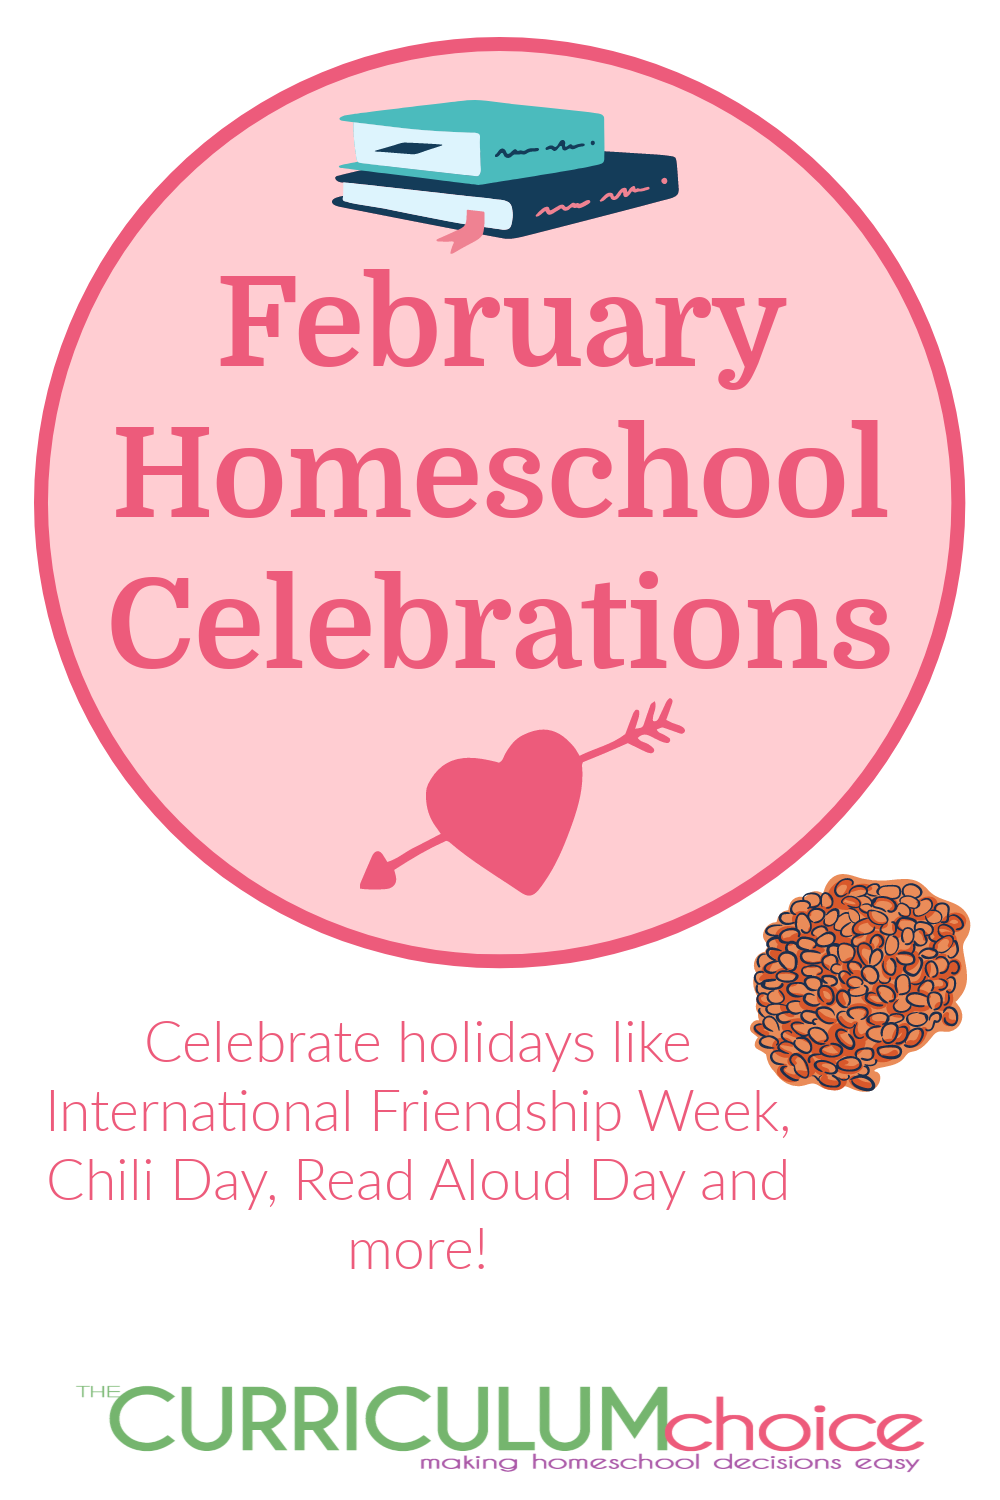 February homeschool celebrations! Add some of the silly, but actual, holiday celebrations below to the family fun this month and throw in a few unique family ones, too.